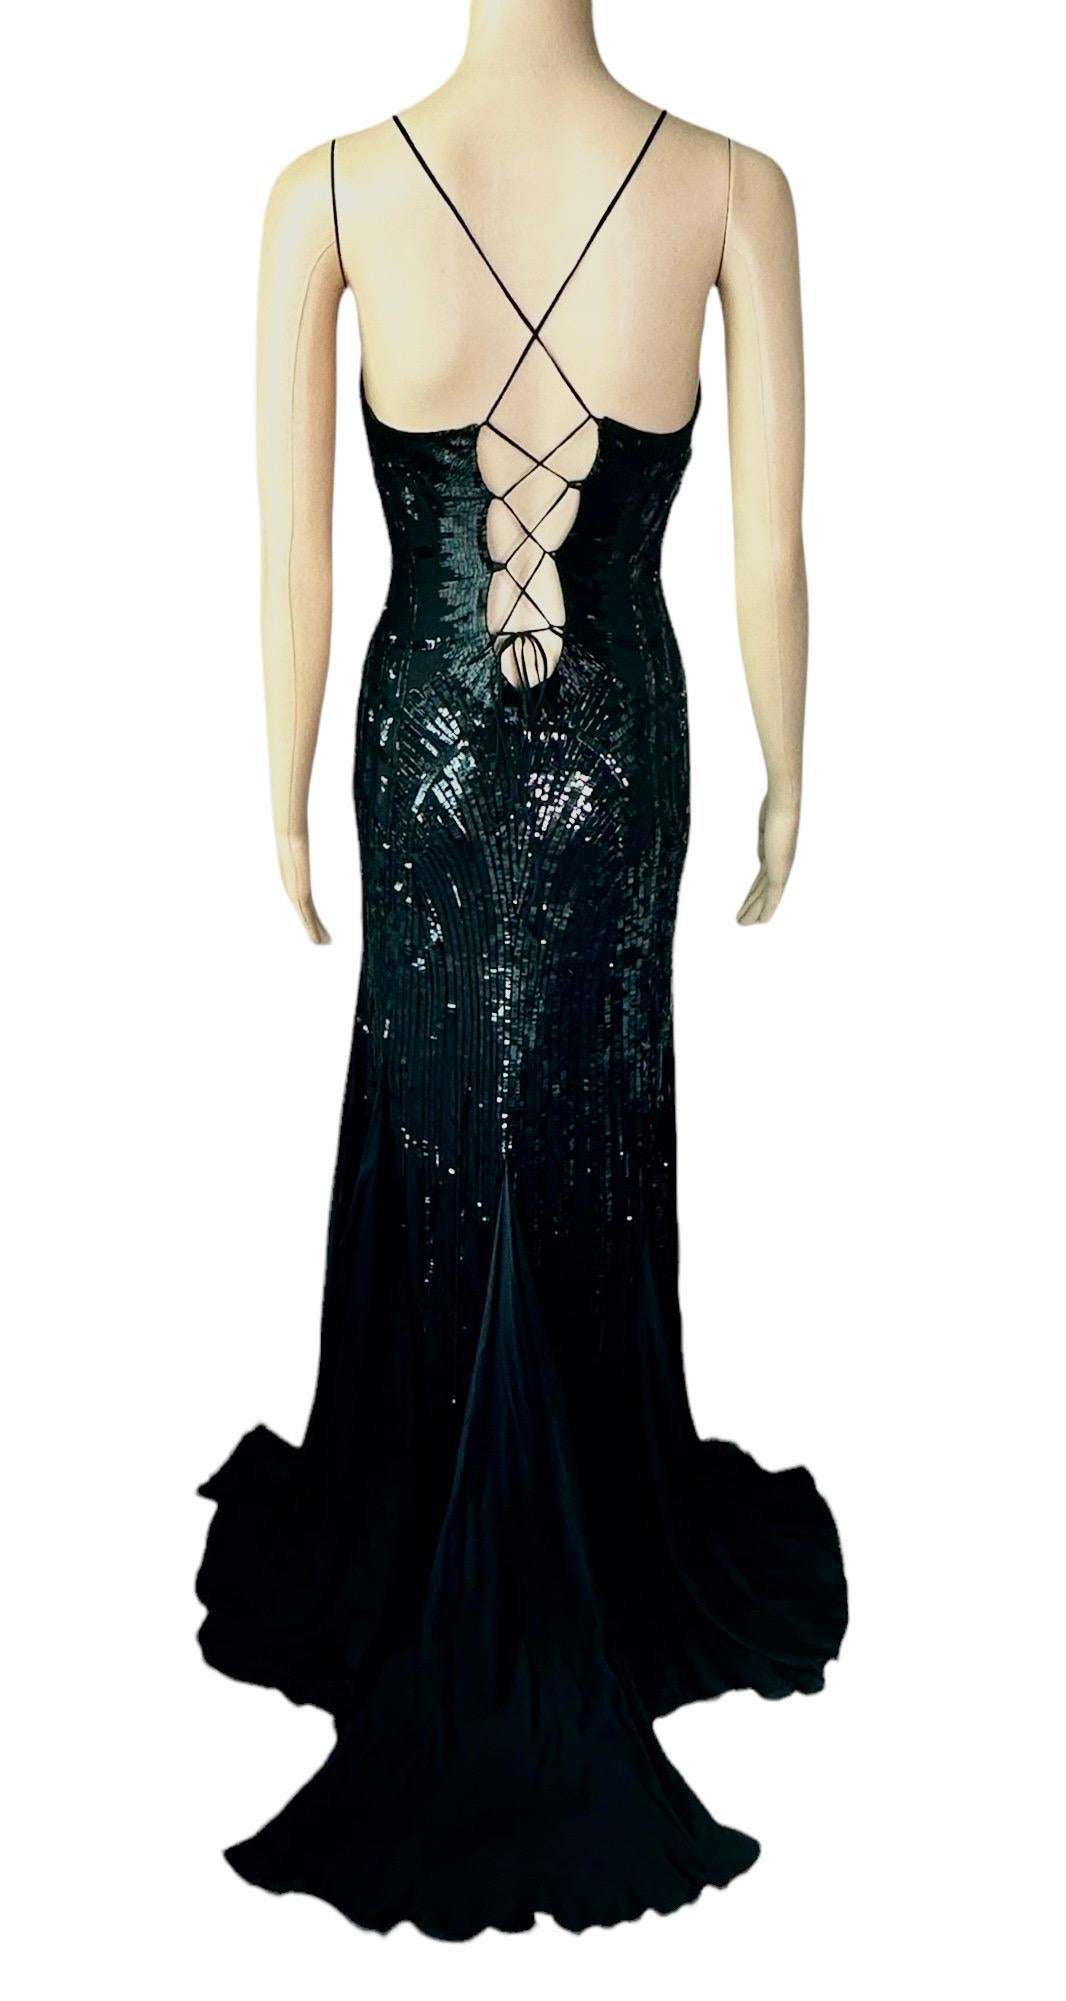 Roberto Cavalli S/S 2011 Embellished Plunged Lace Up Black Evening Dress Gown 4